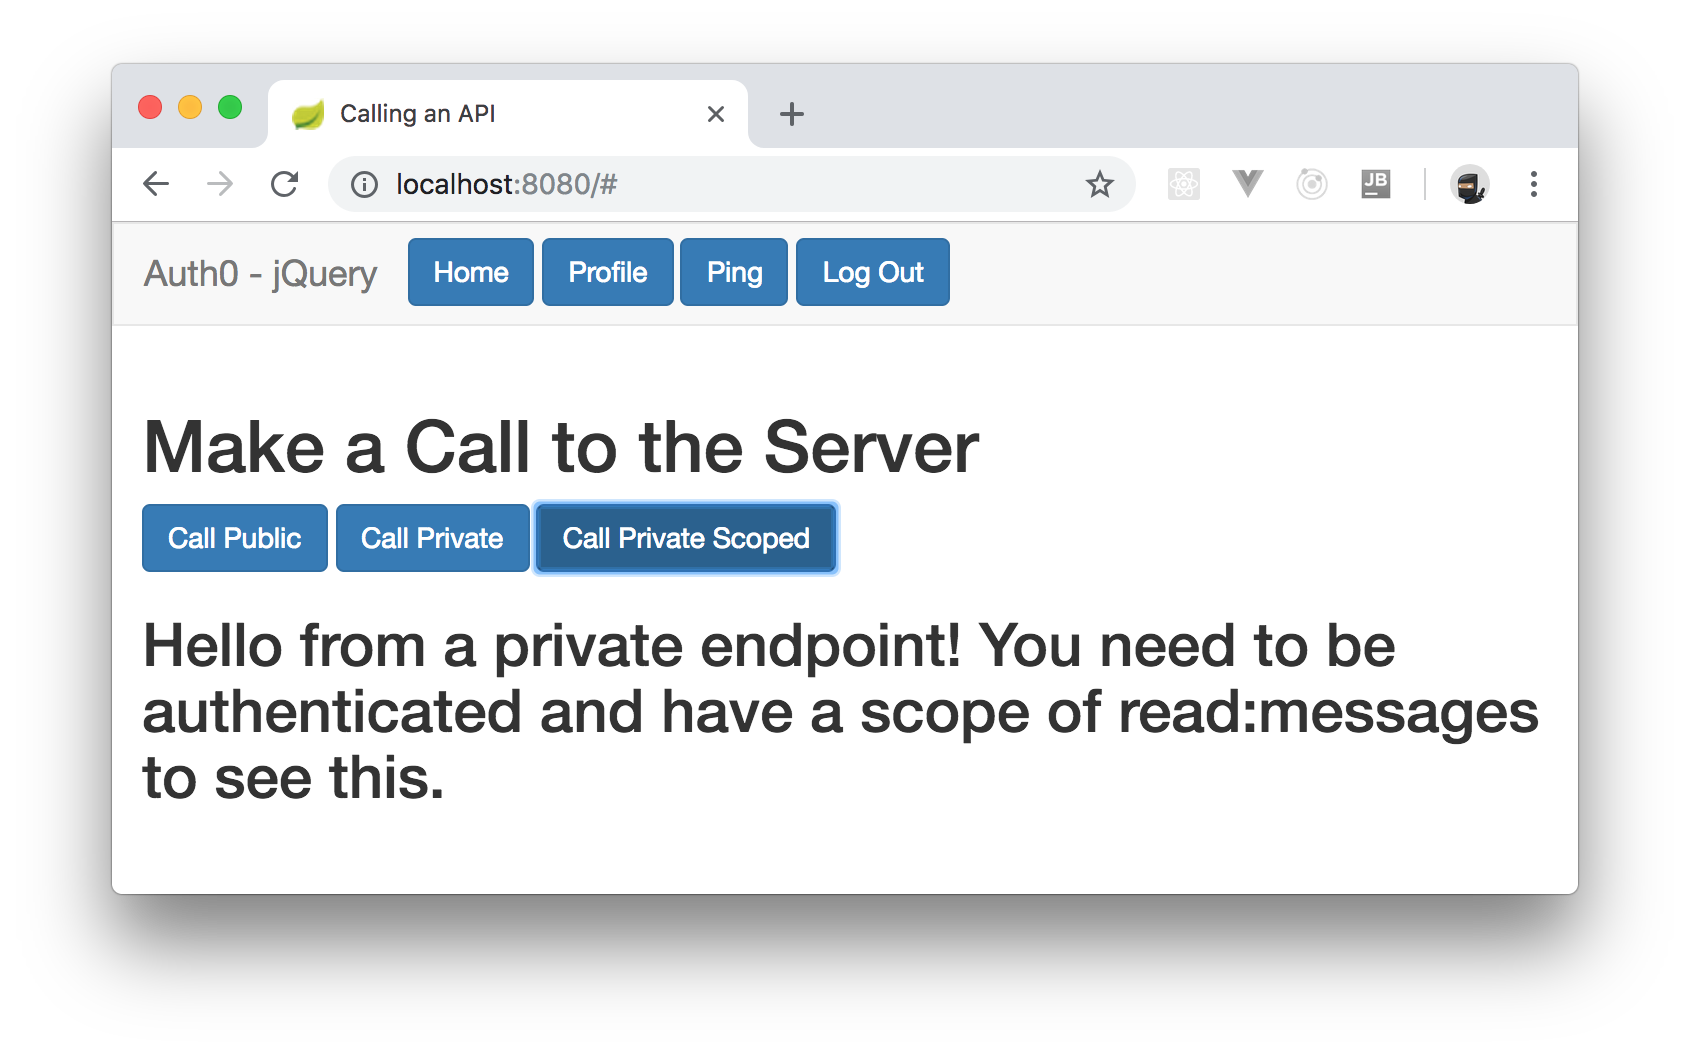 Locally running the SPA - Secure call with OAuth 2.0 and consuming a Spring Boot API